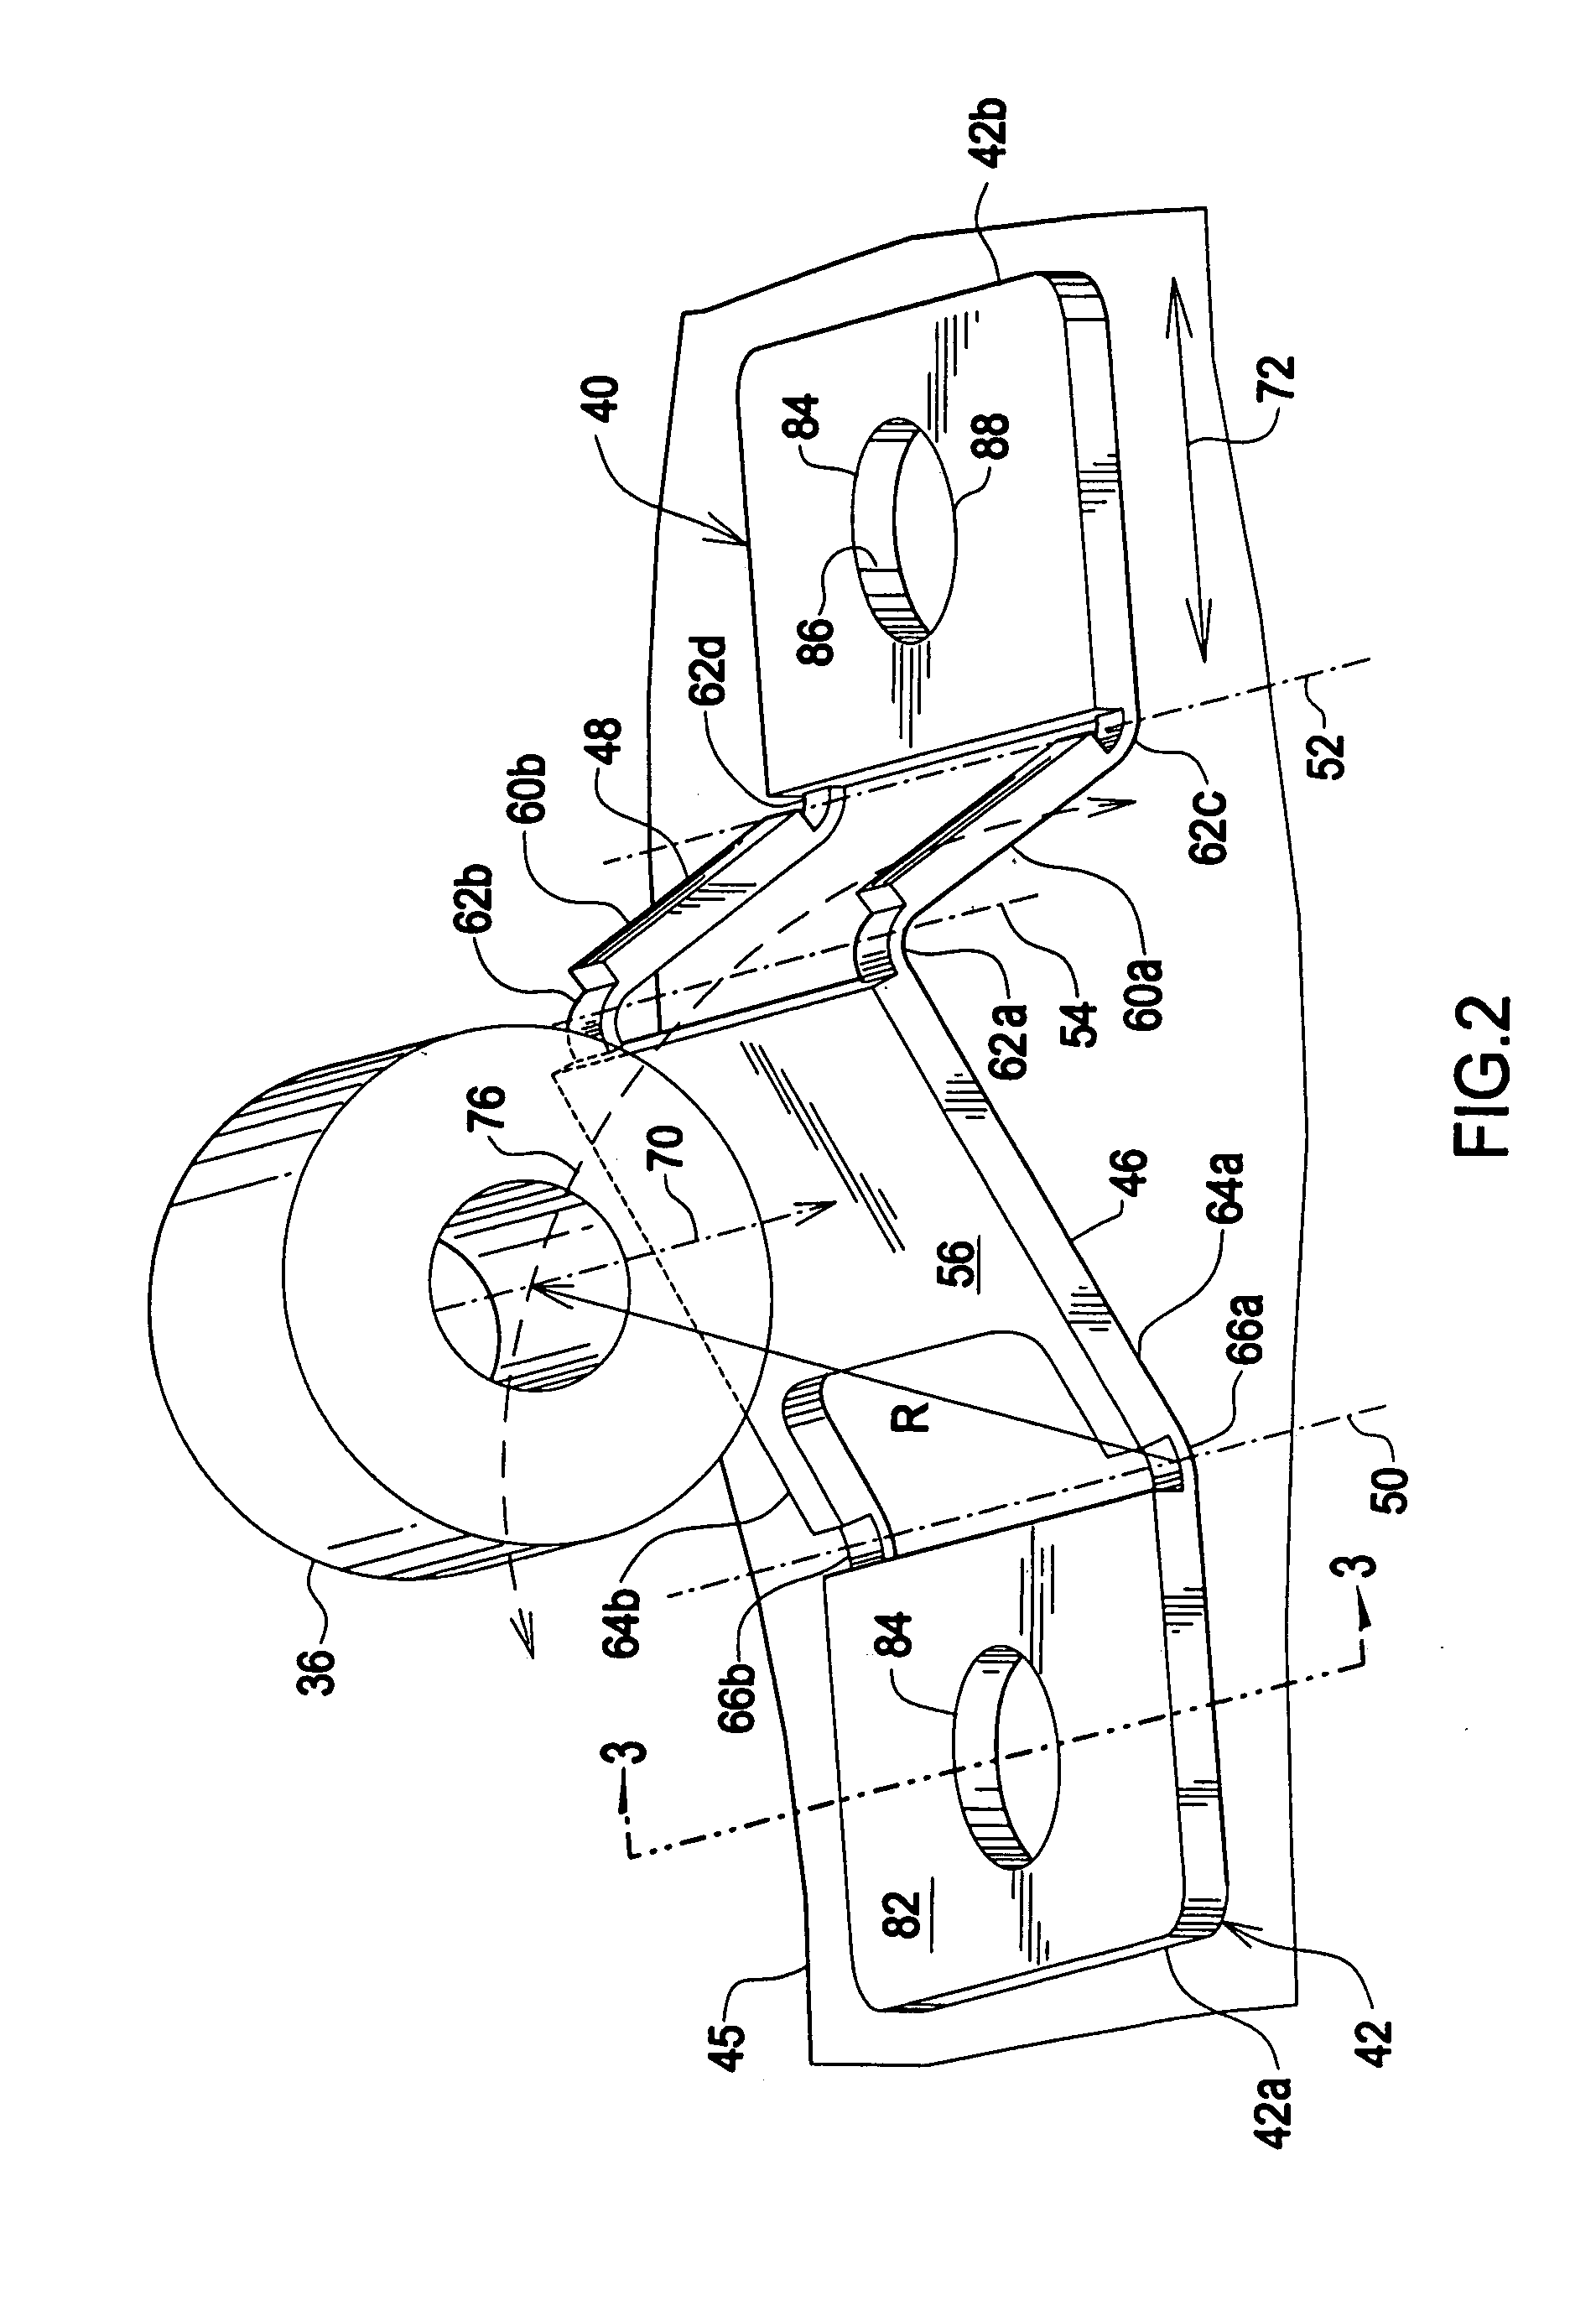 Sub-micron adjustable mount for supporting a component and method